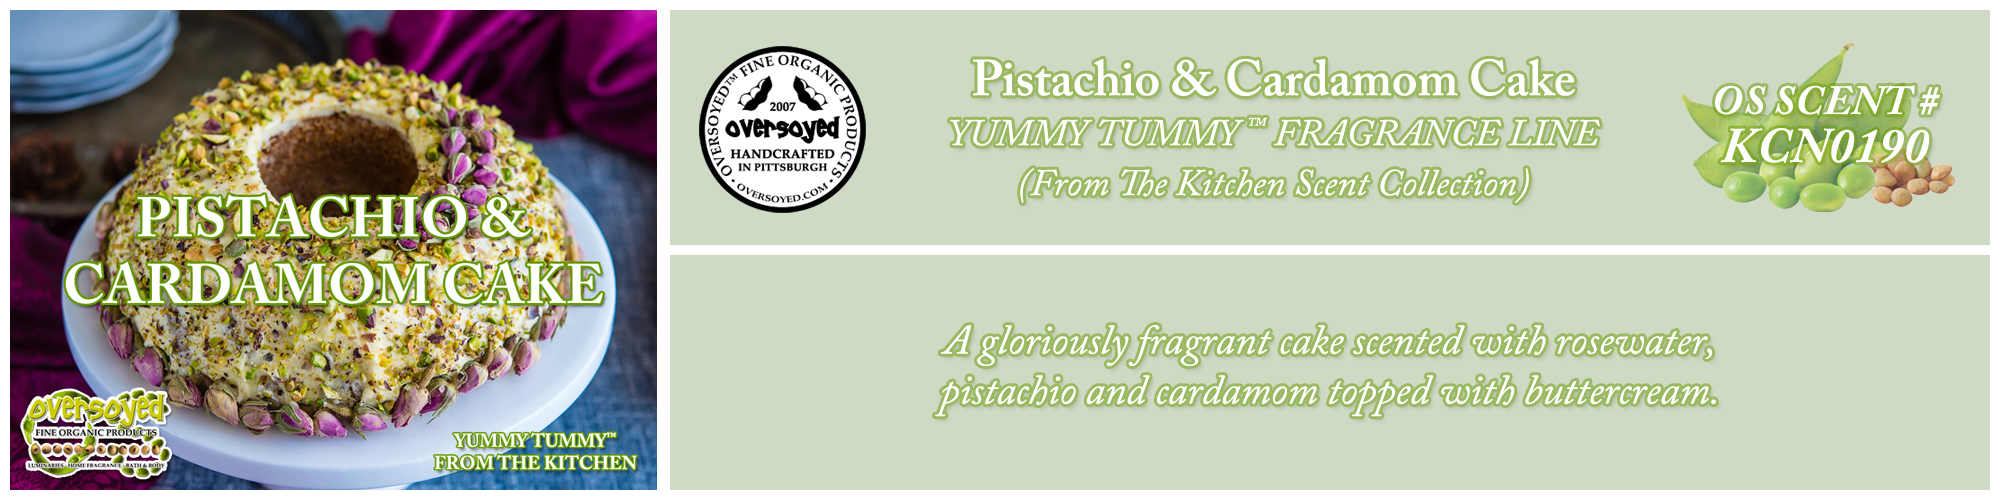 Pistachio & Cardamom Cake Handcrafted Products Collection